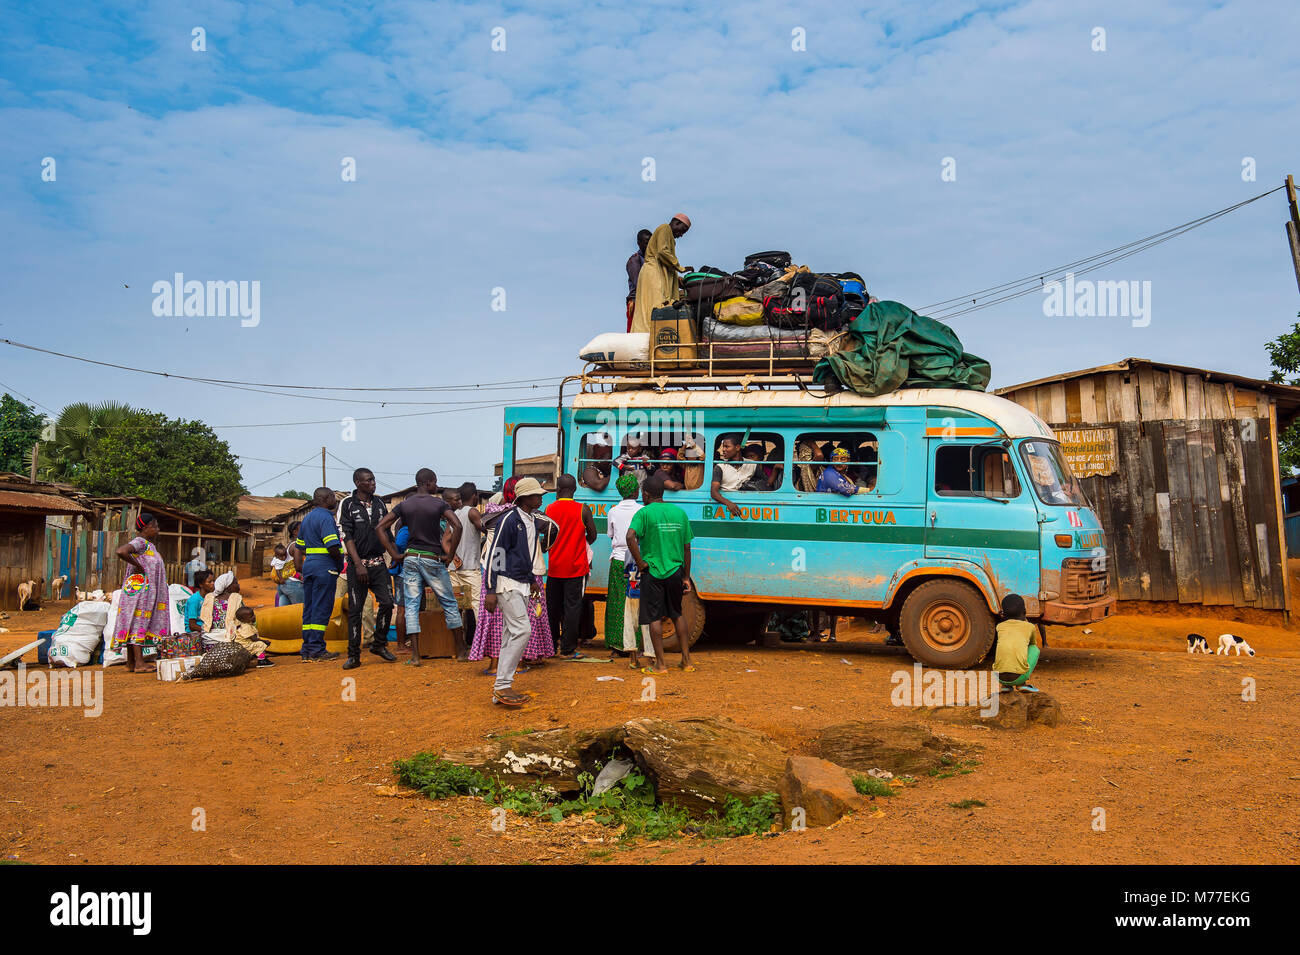 Fully loaded local bus in Libongo, deep in the jungle of Cameroon, Africa Stock Photo